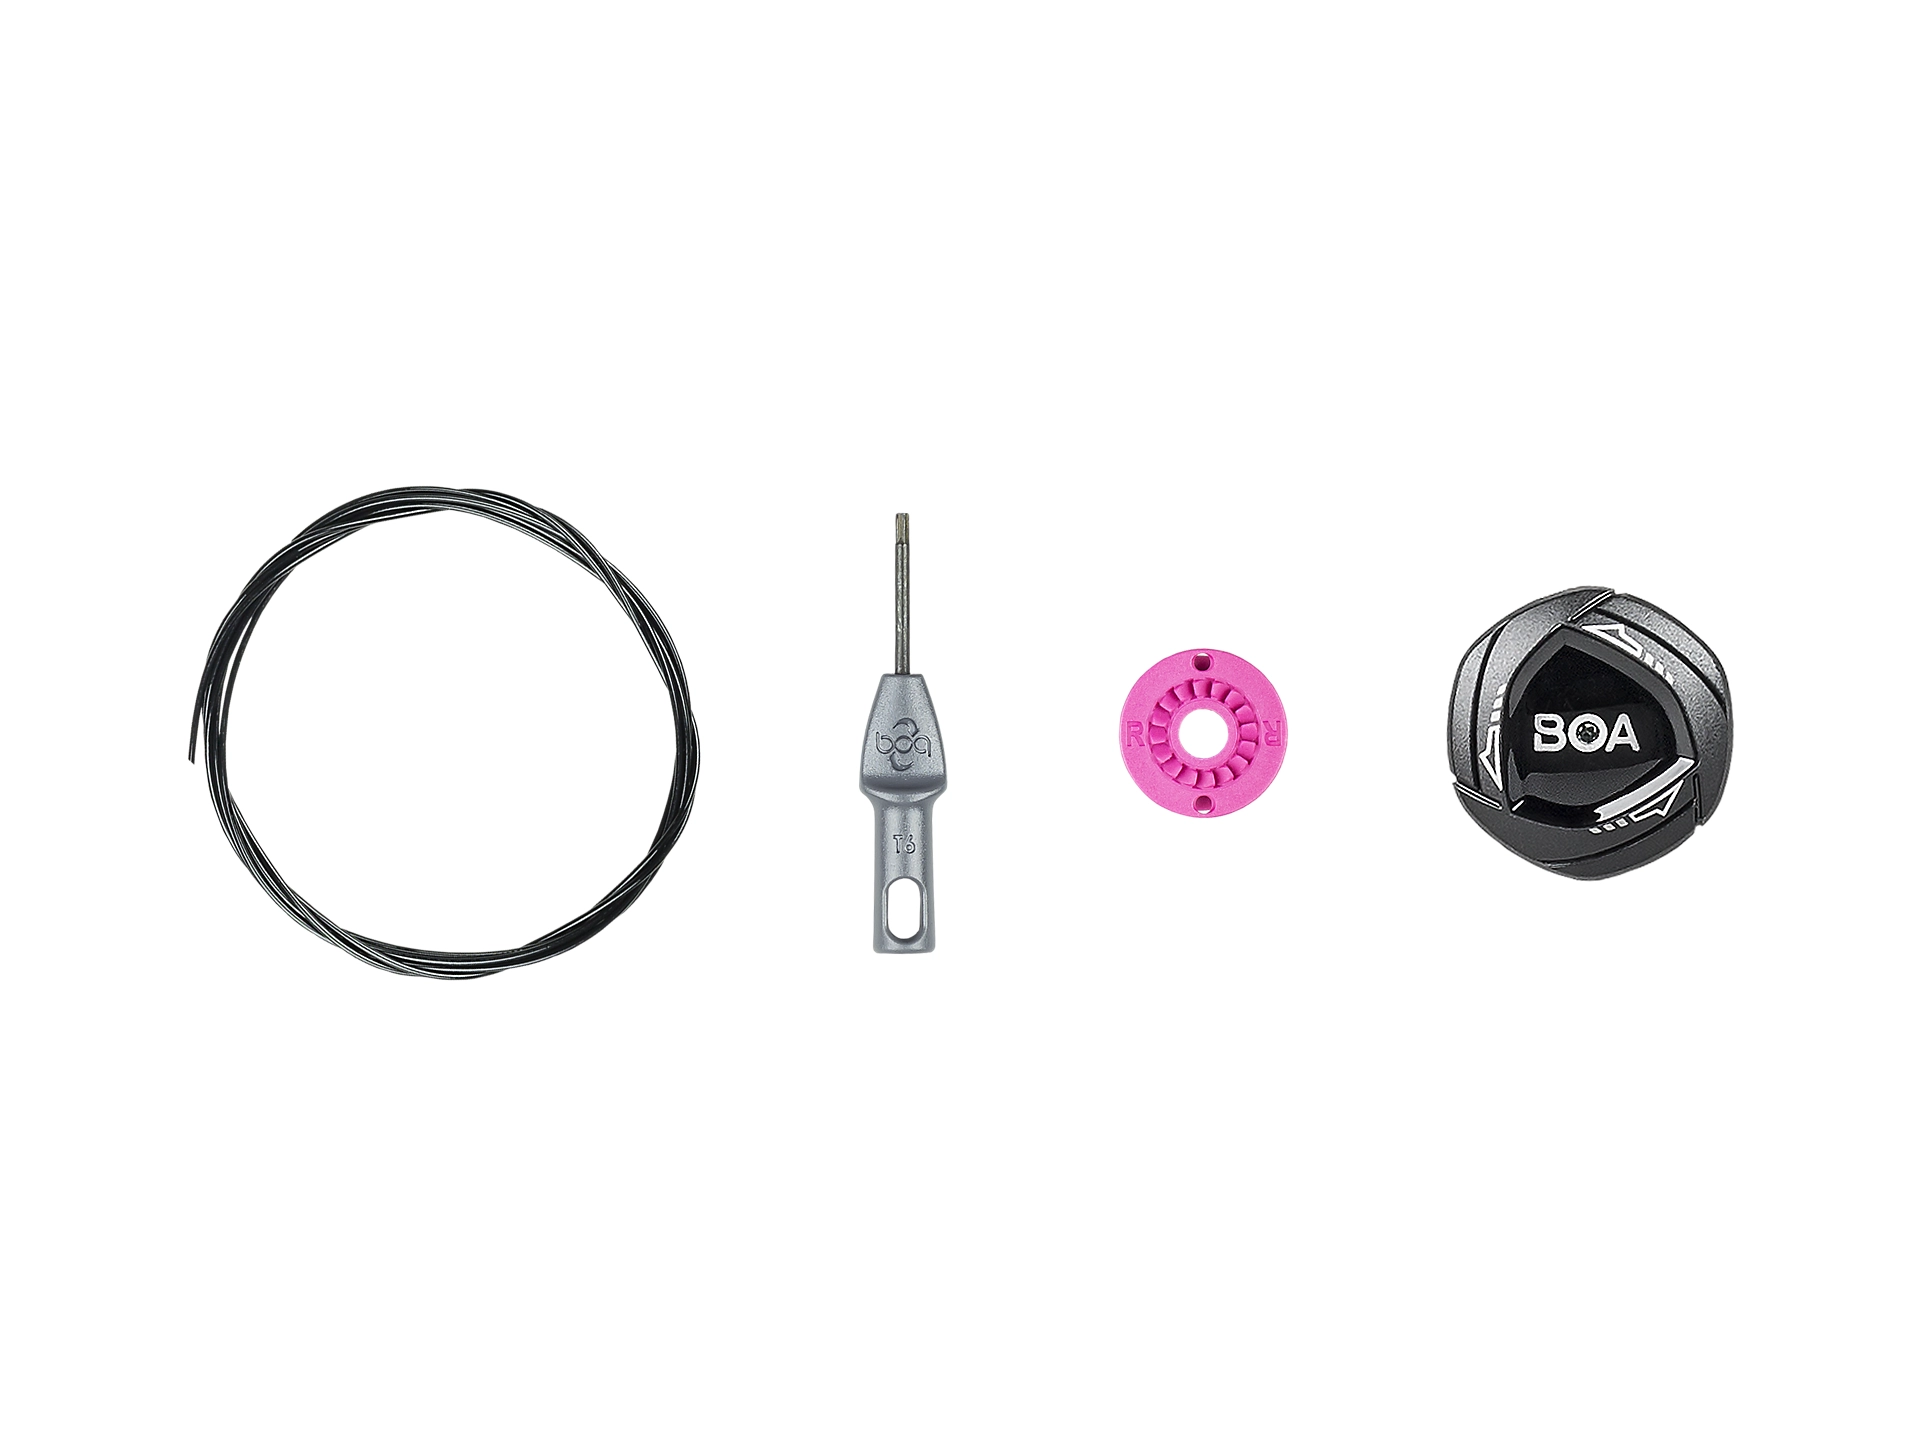 BOA Shoe Replacement IP1 Right Dial Kit Prawy